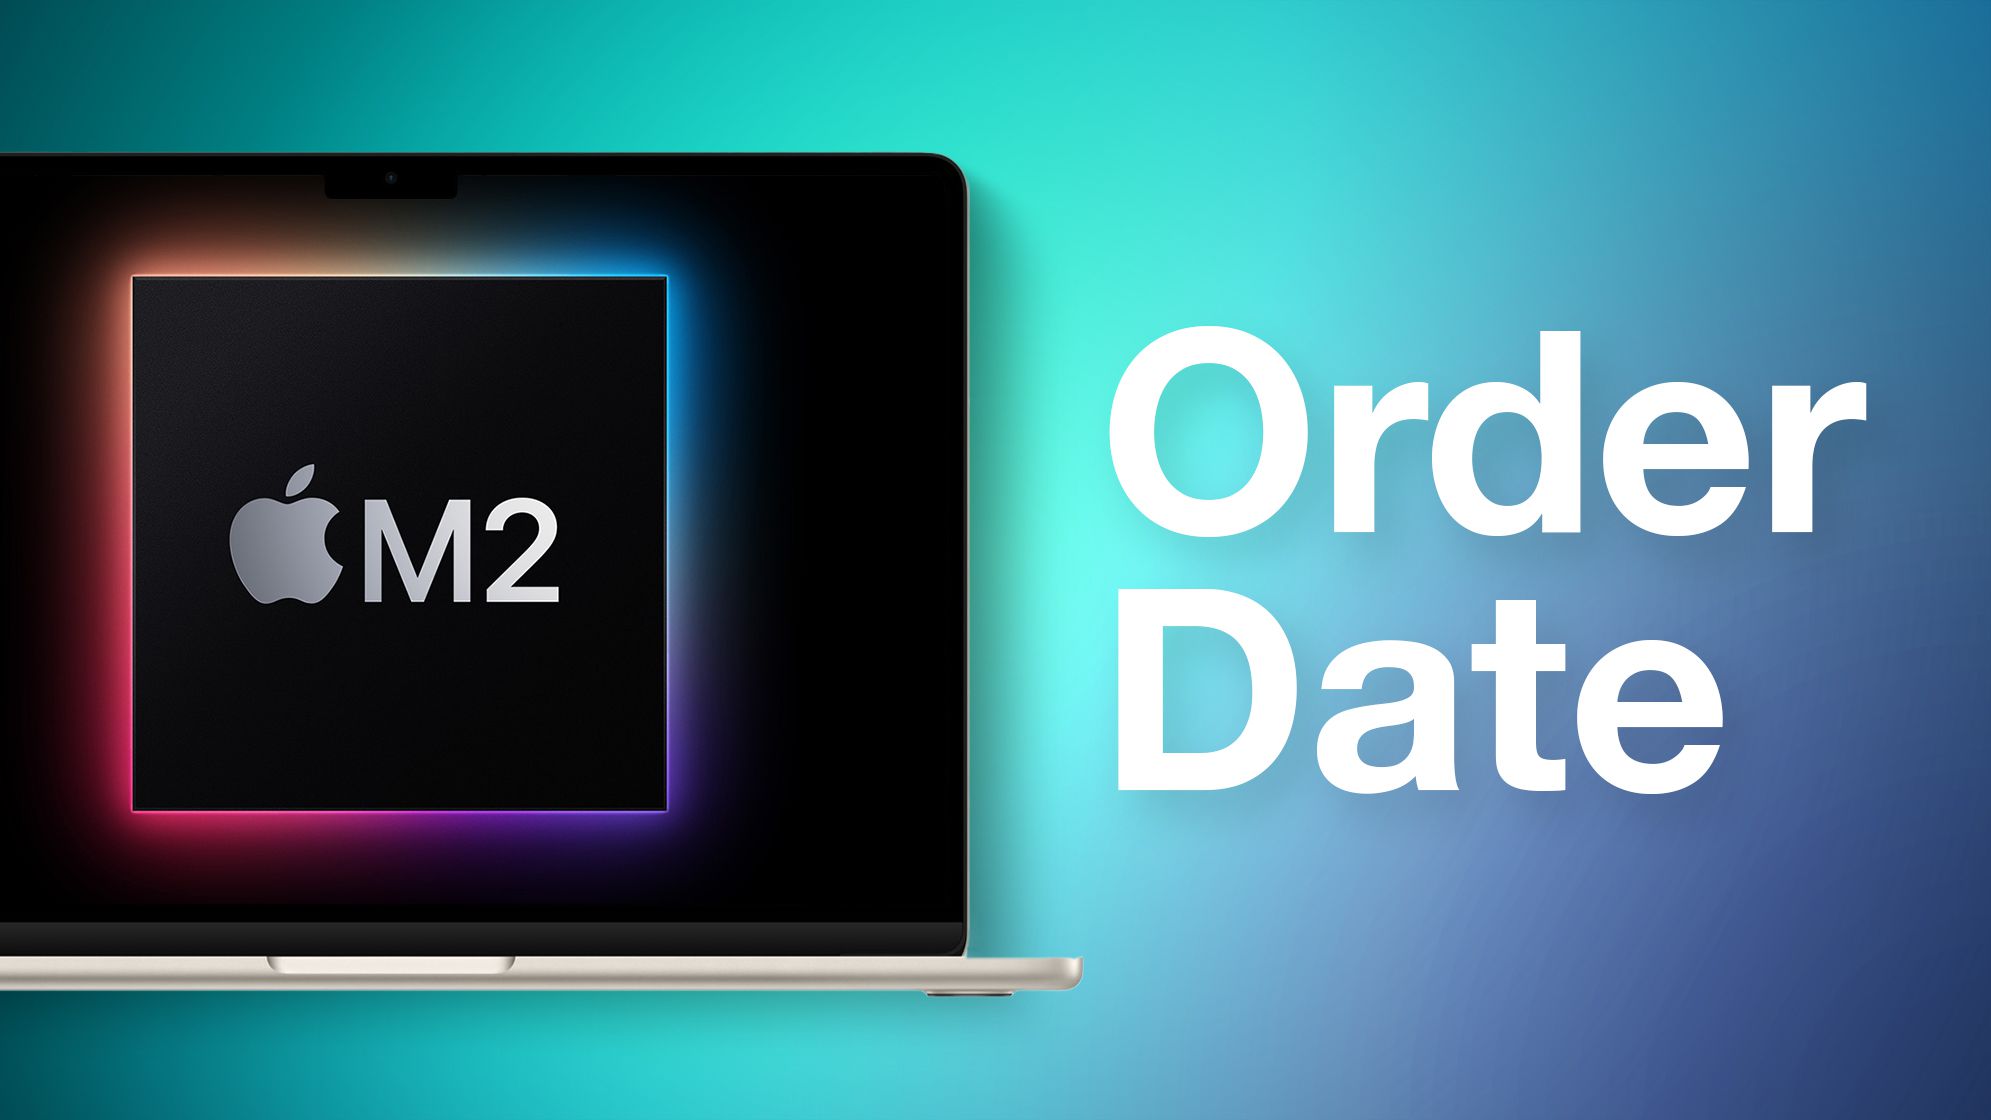 Apple Declares MacBook Air With M2 Chip Accessible to Order Beginning July 8, Launches July 15